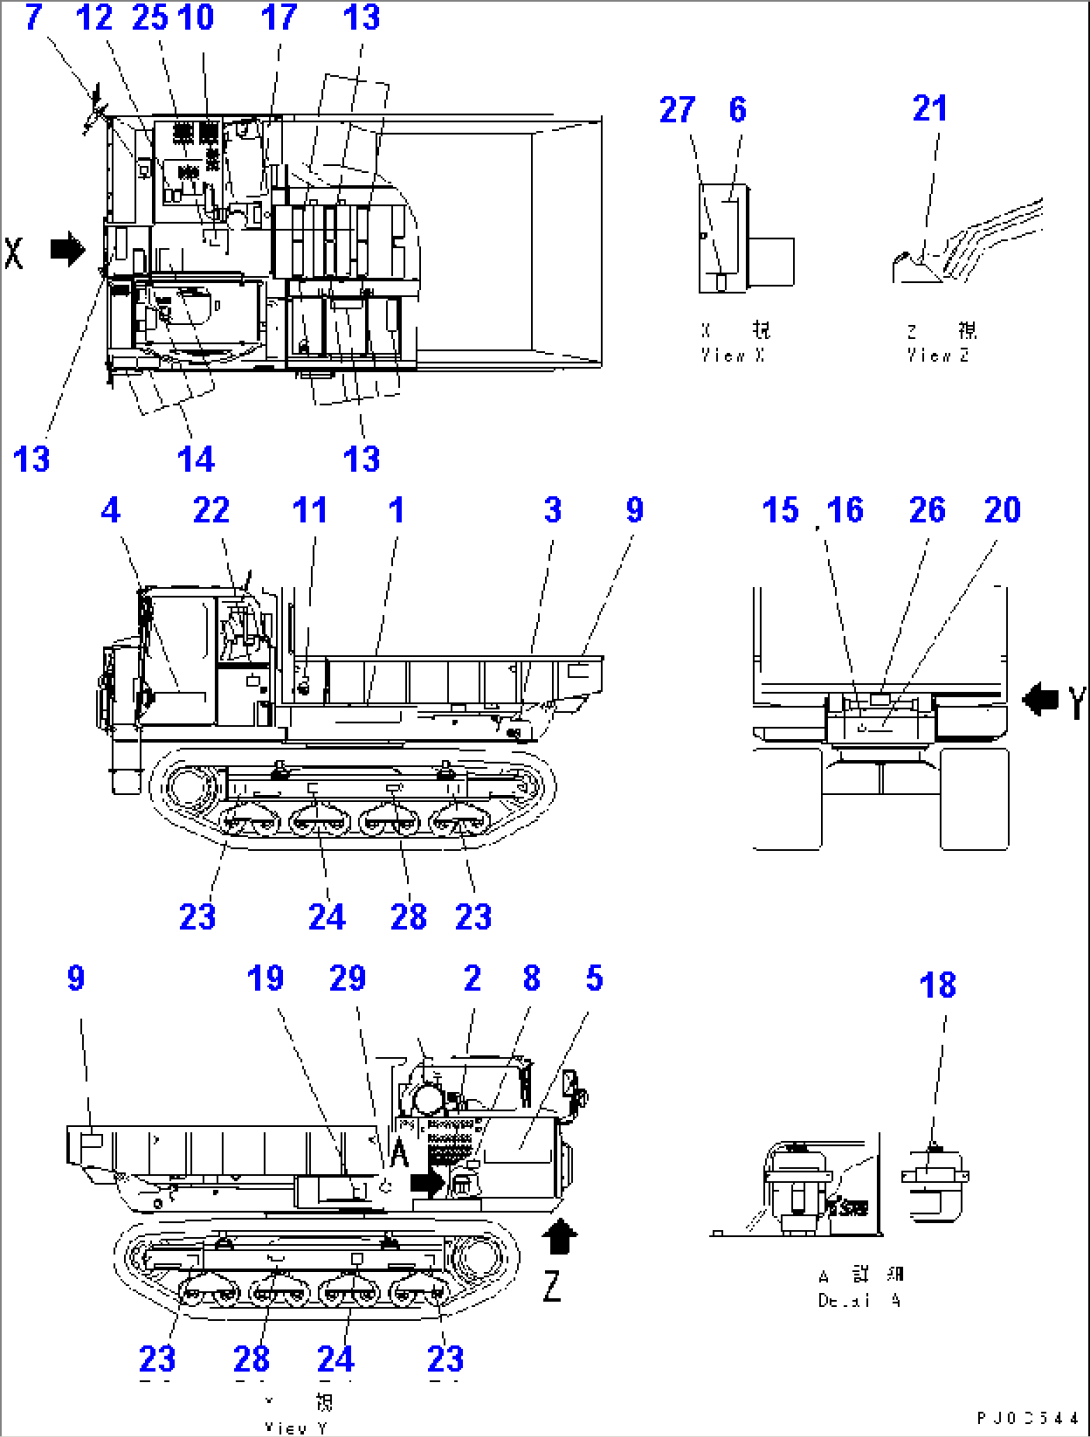 MARKS AND PLATES (1/2)(#1340-)